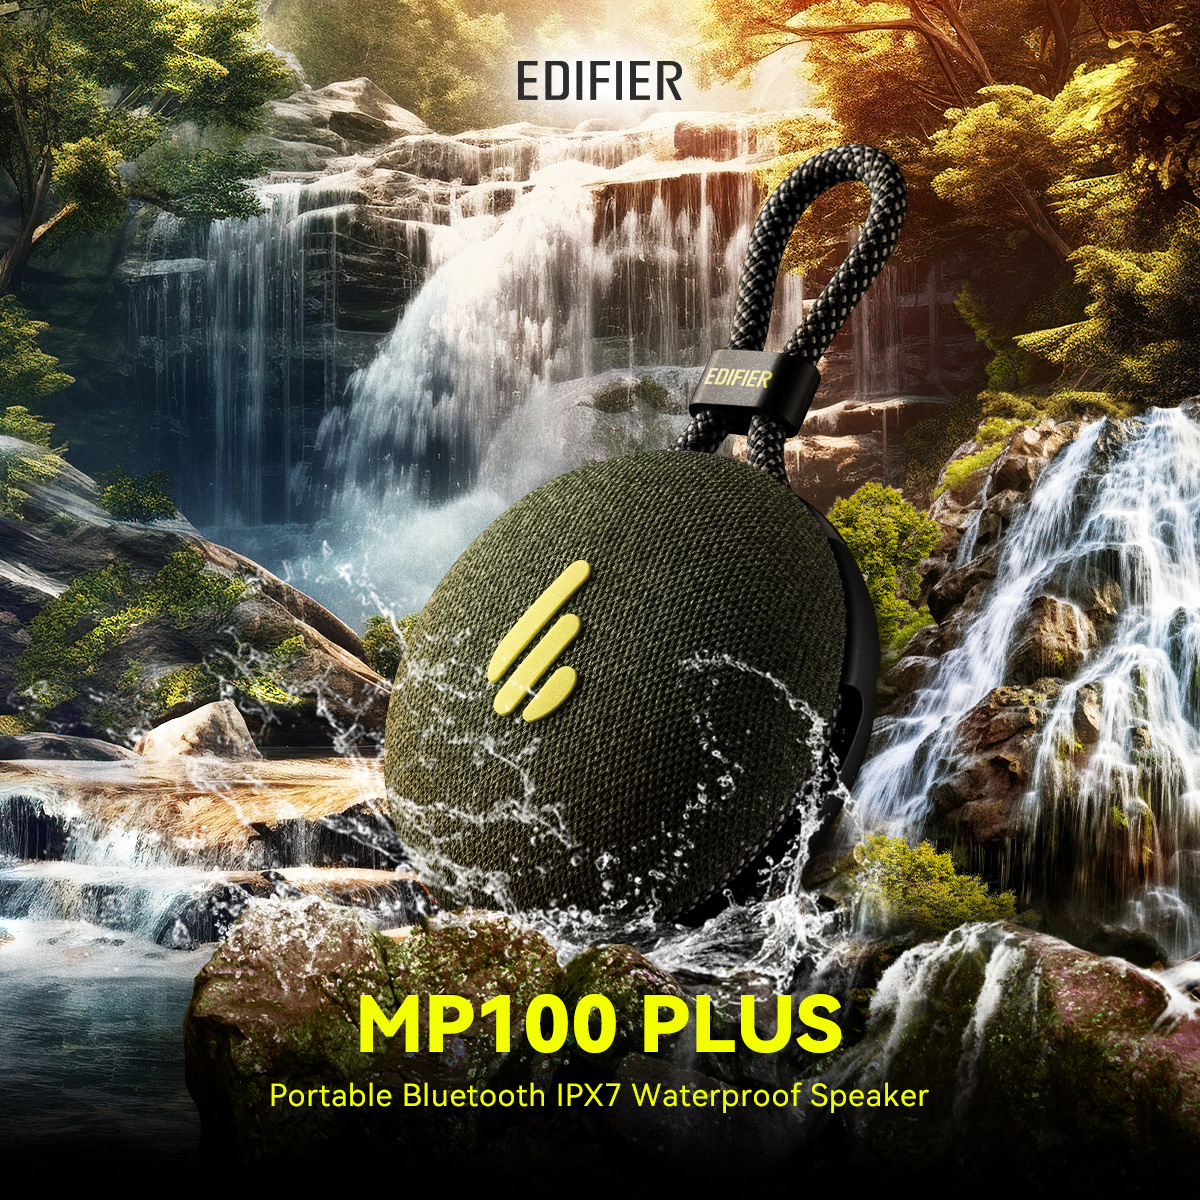 🎶 Take your tunes to new depths with the Edifier MP100 Plus! 🌊 Dive into music wherever you go, rain or shine, with its IPX7 waterproof design. 

#EdifierMalaysia #EdifierMP100Plus #WaterproofSound #PortableMusic #MP100Plus #PortableSpeaker #Speaker #Portable #BluetoothSpeaker